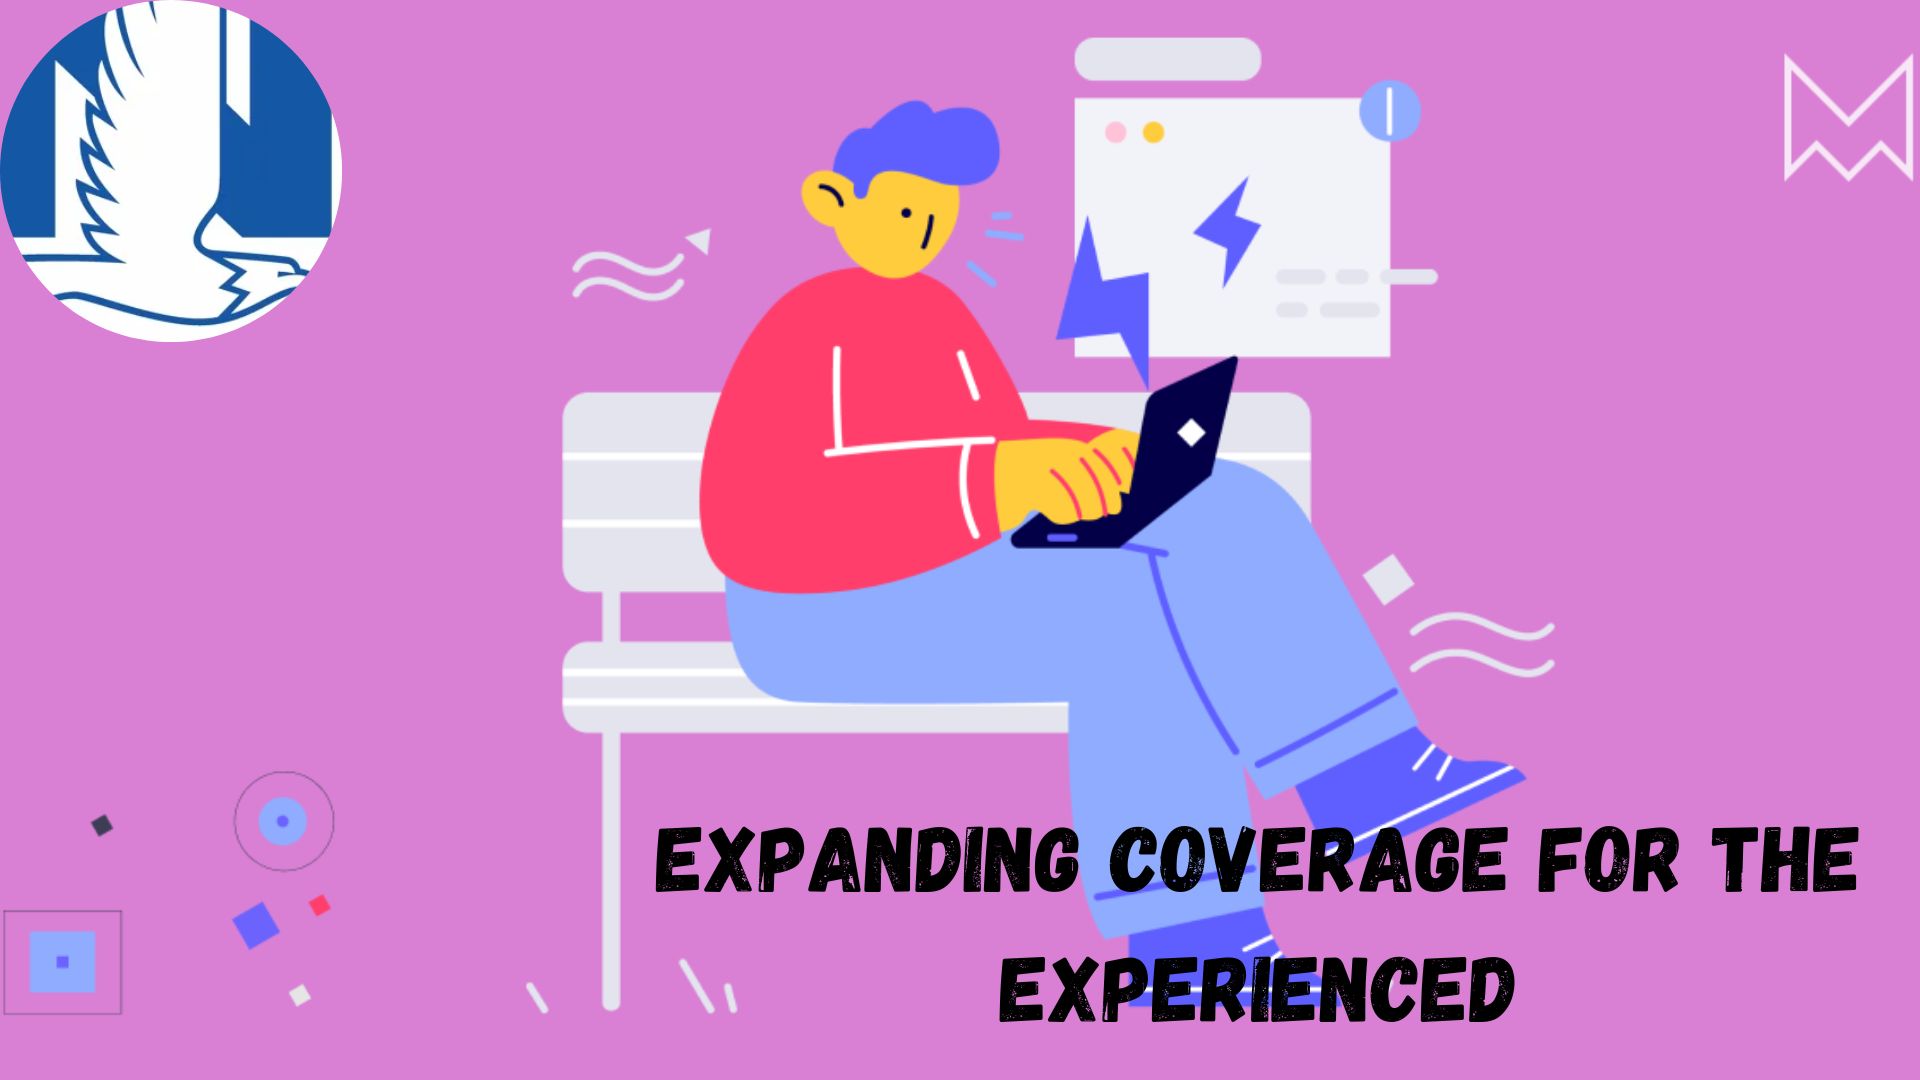 Nationwide Expanding Coverage for the Experienced.